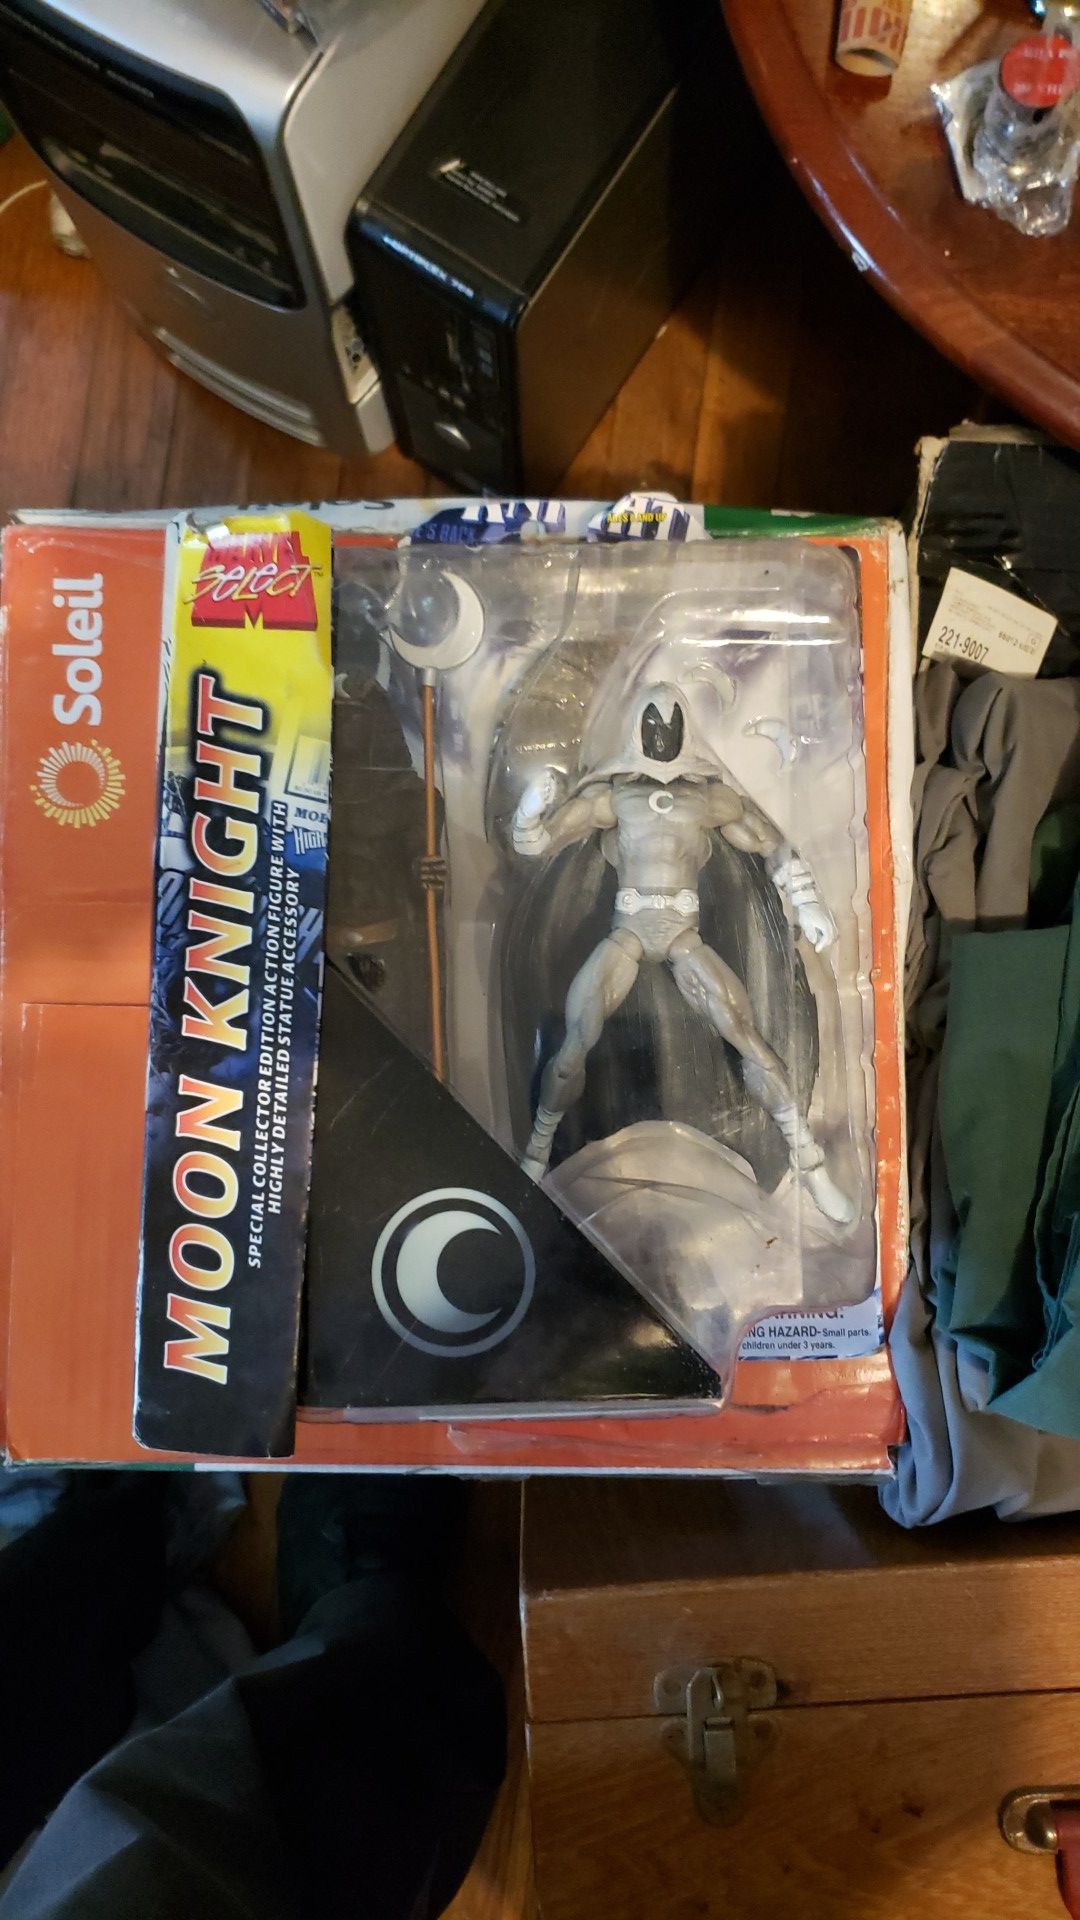 Marvels select moon night special collector's action figure with highly detailed statue accessory